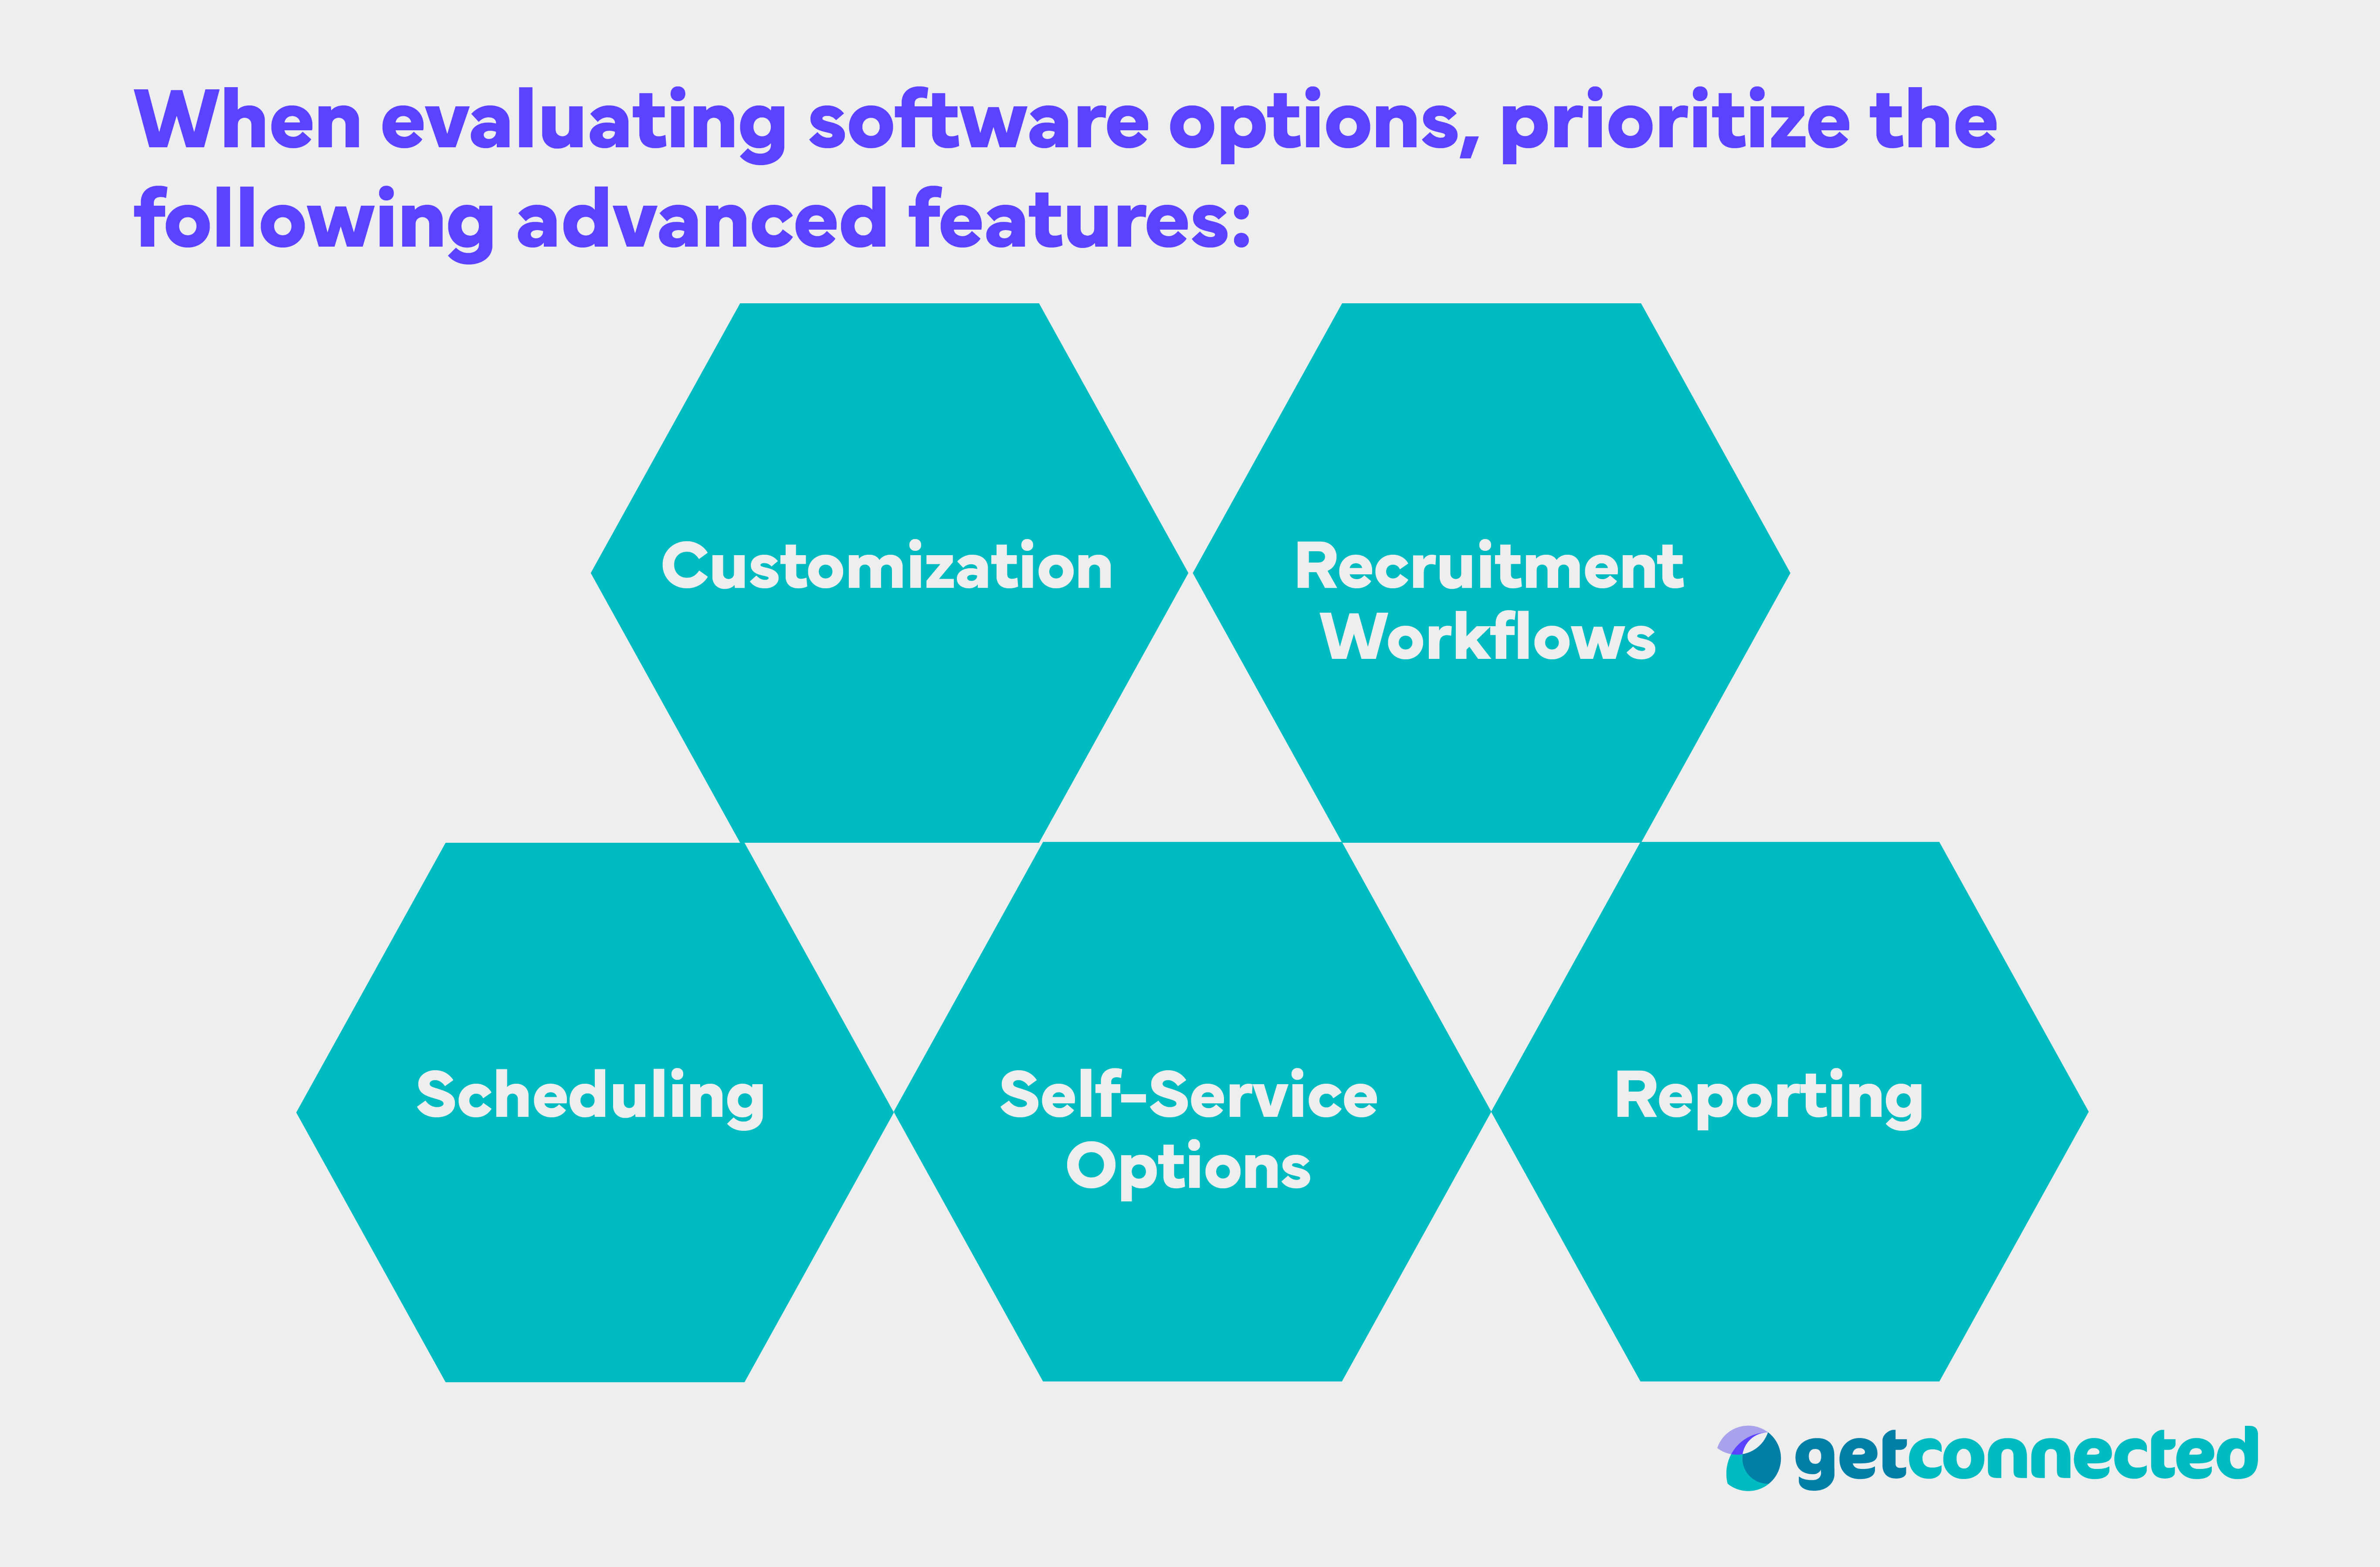 How to start a volunteer program and evaluating software options